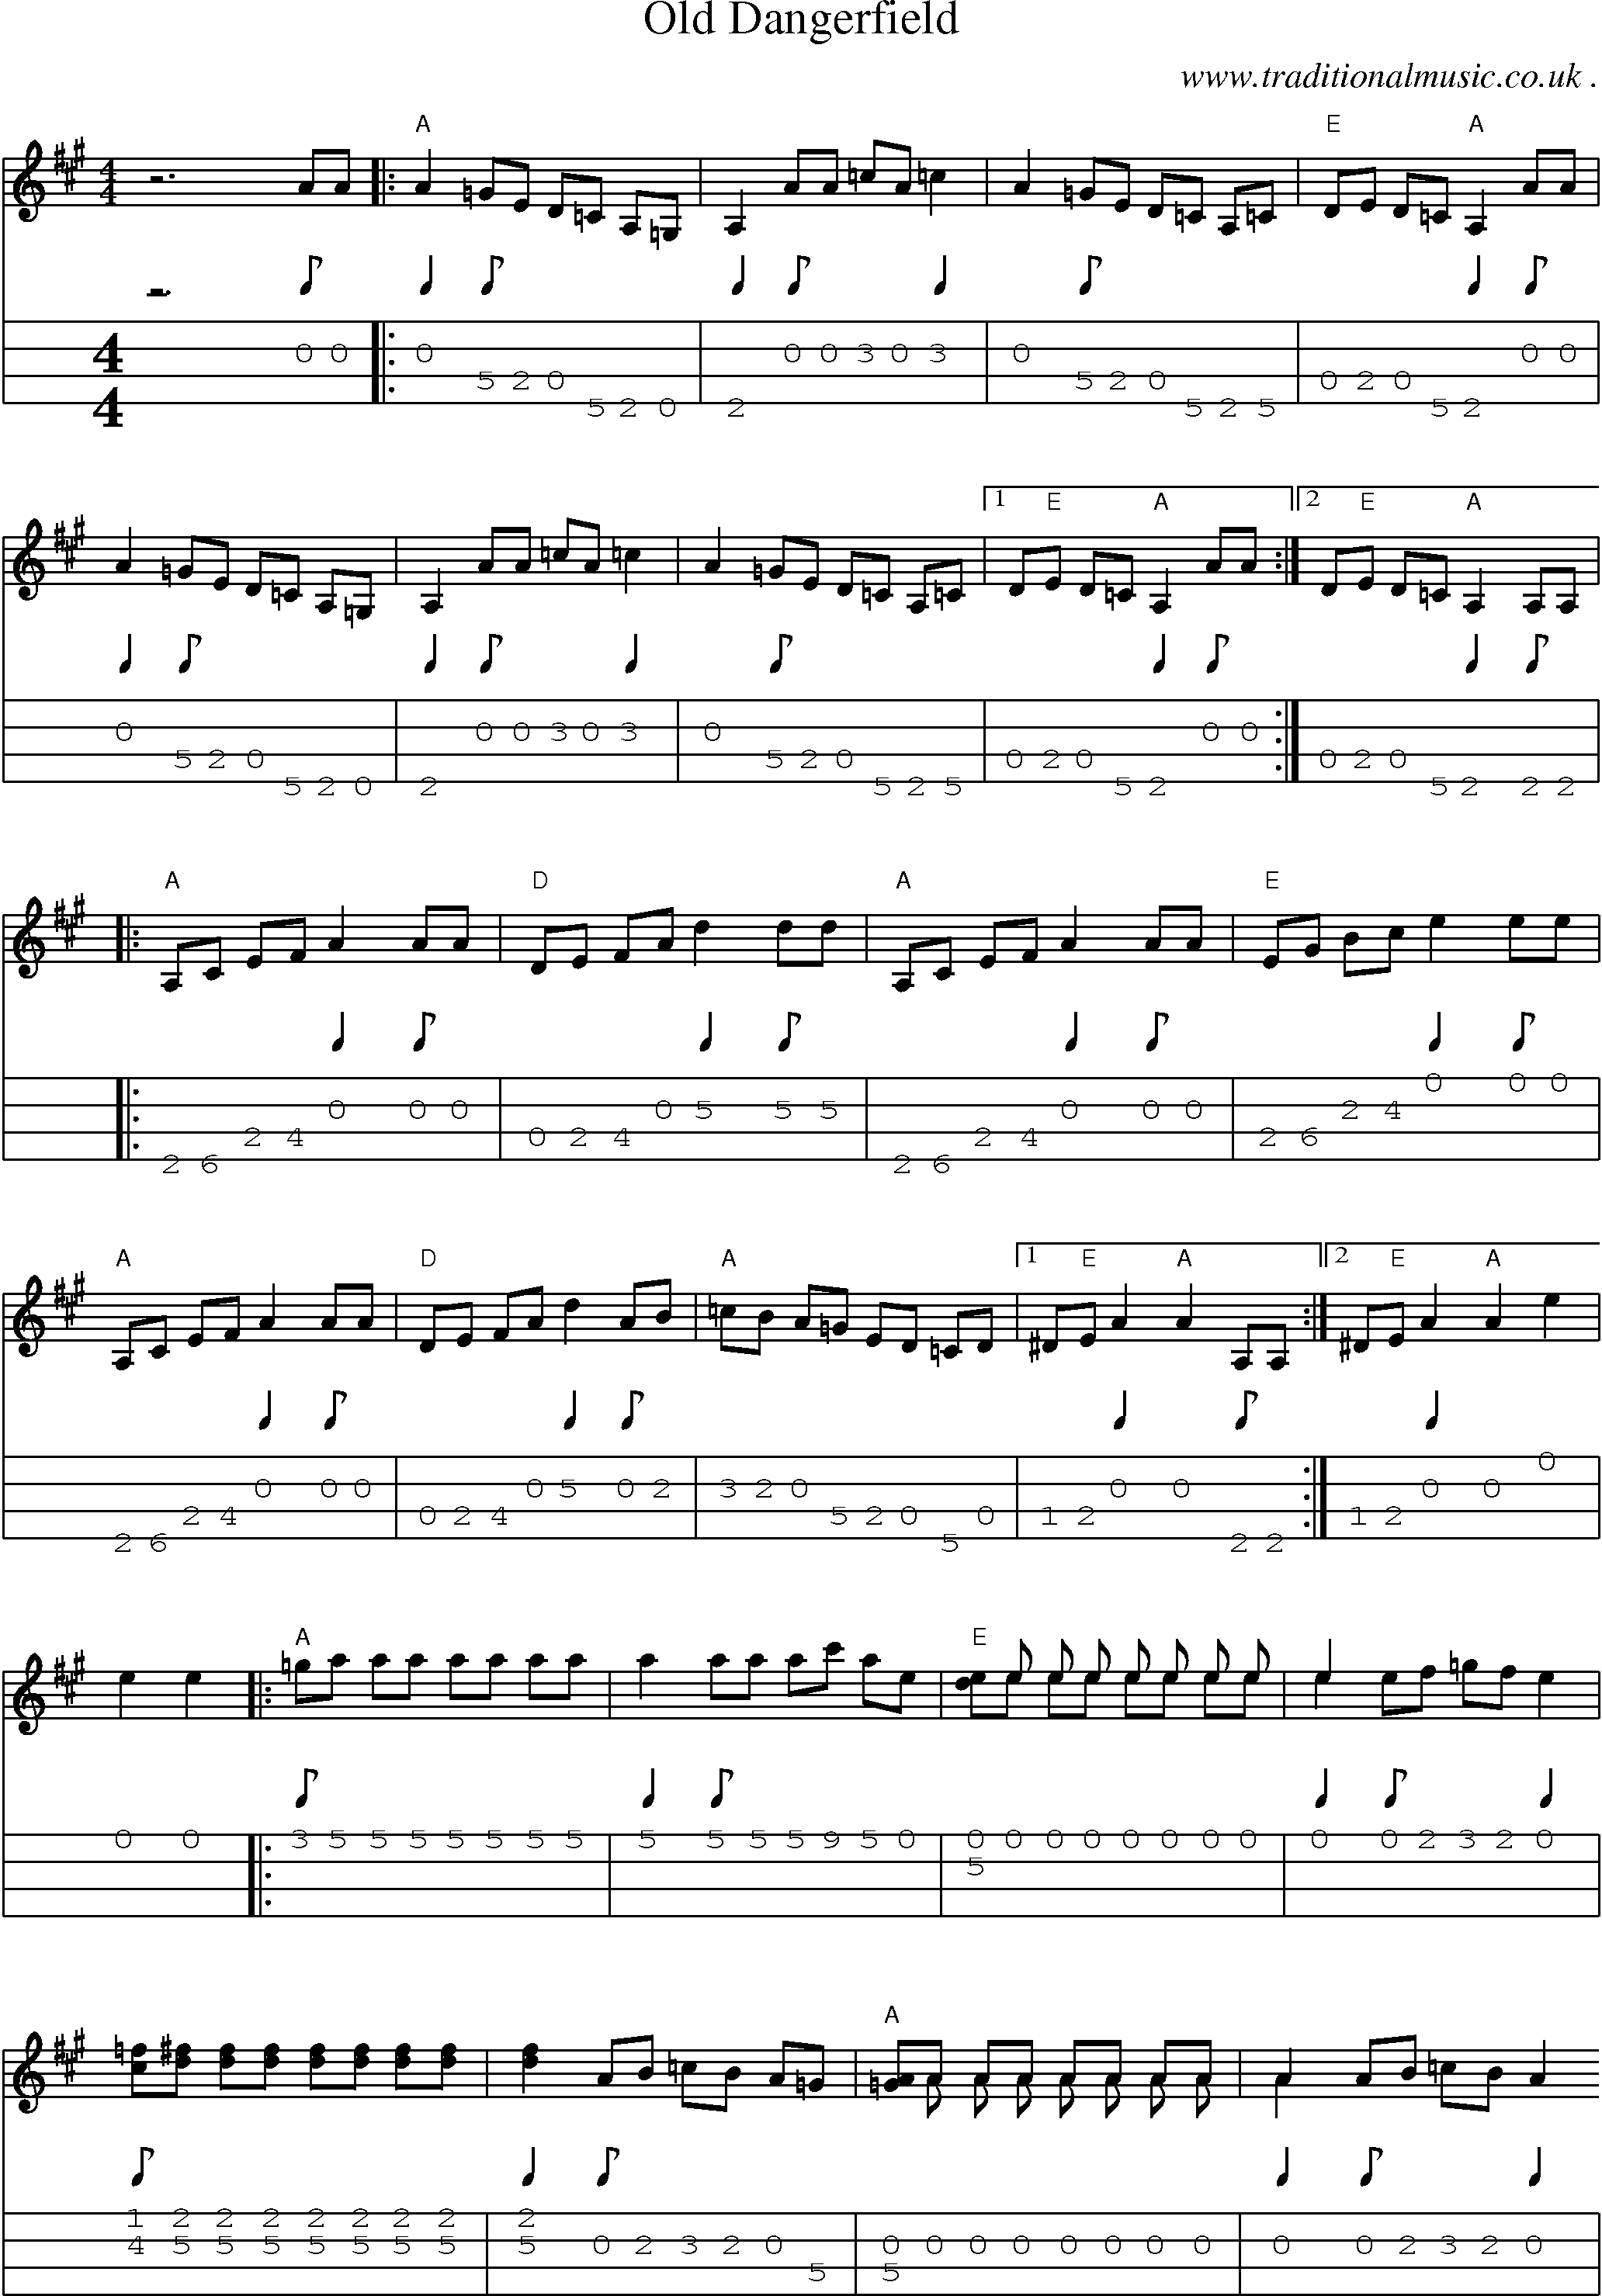 Music Score and Guitar Tabs for Old Dangerfield